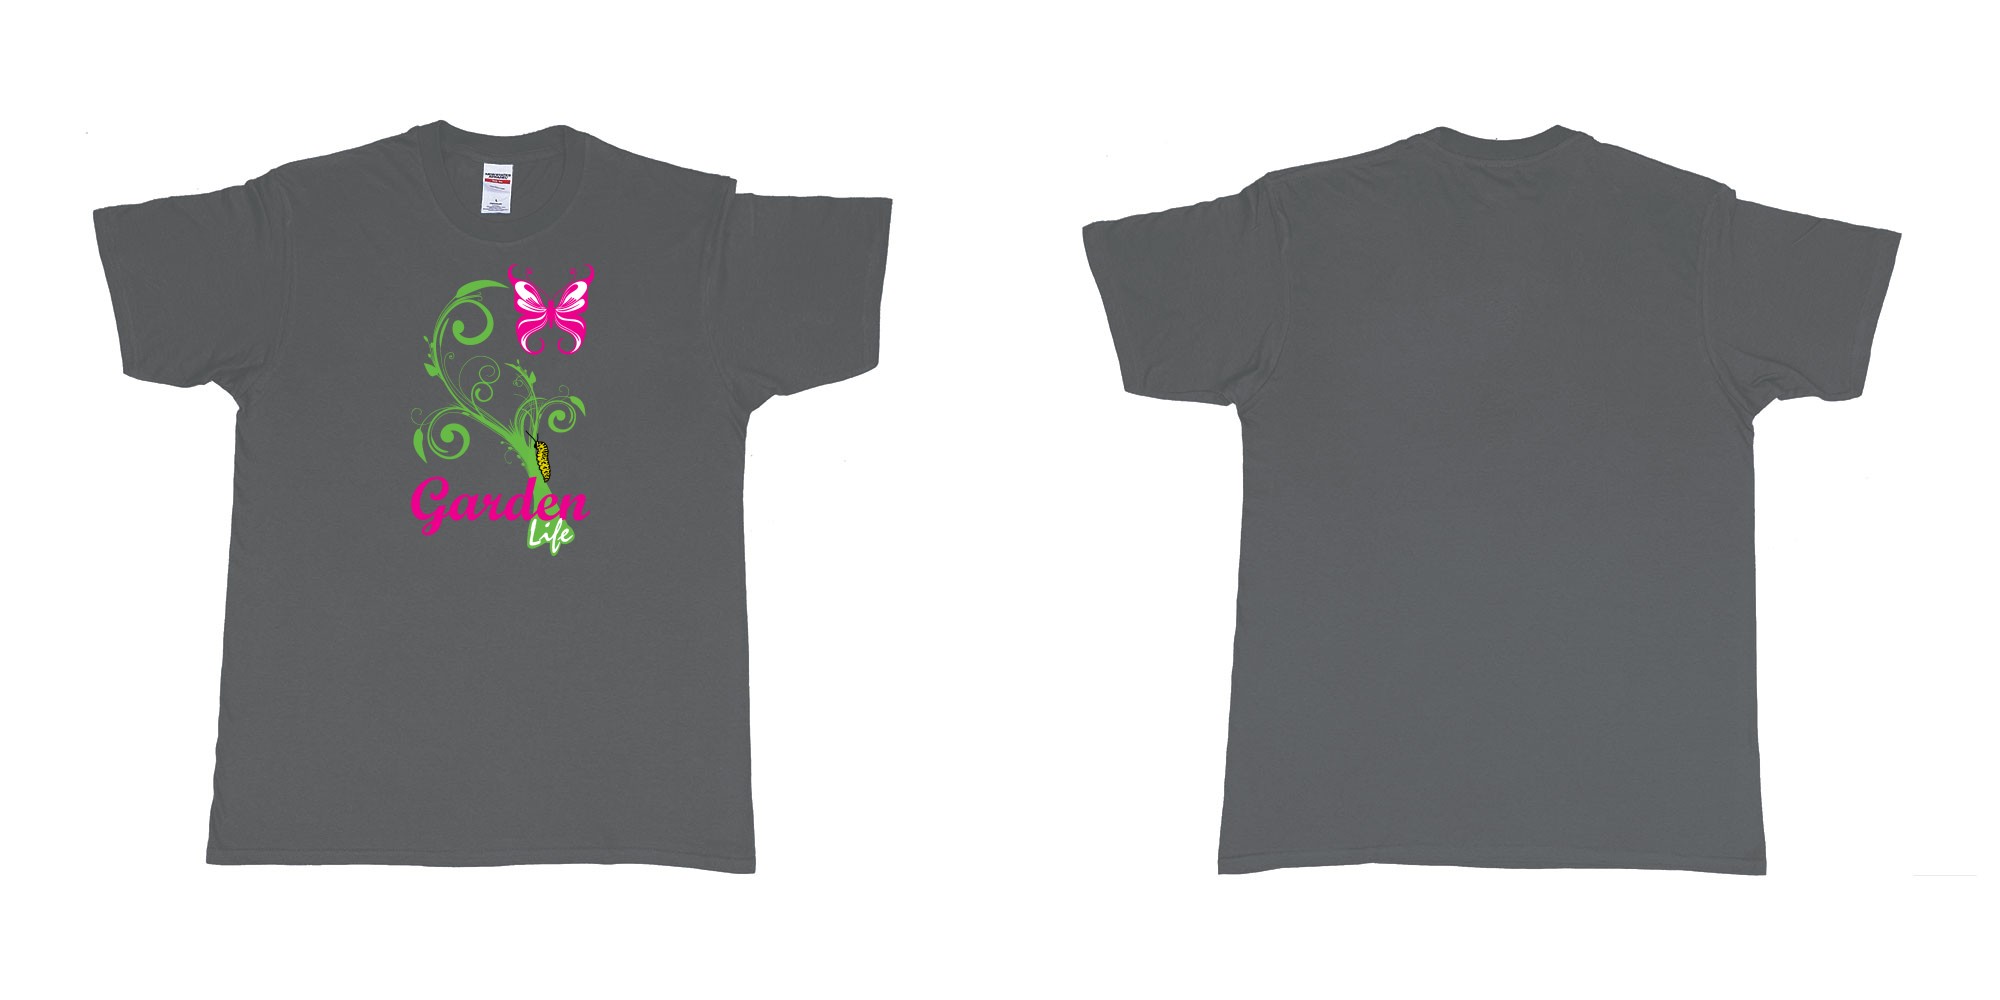 Custom tshirt design garden life transformation from a caterpillar and a butterfly in fabric color charcoal choice your own text made in Bali by The Pirate Way